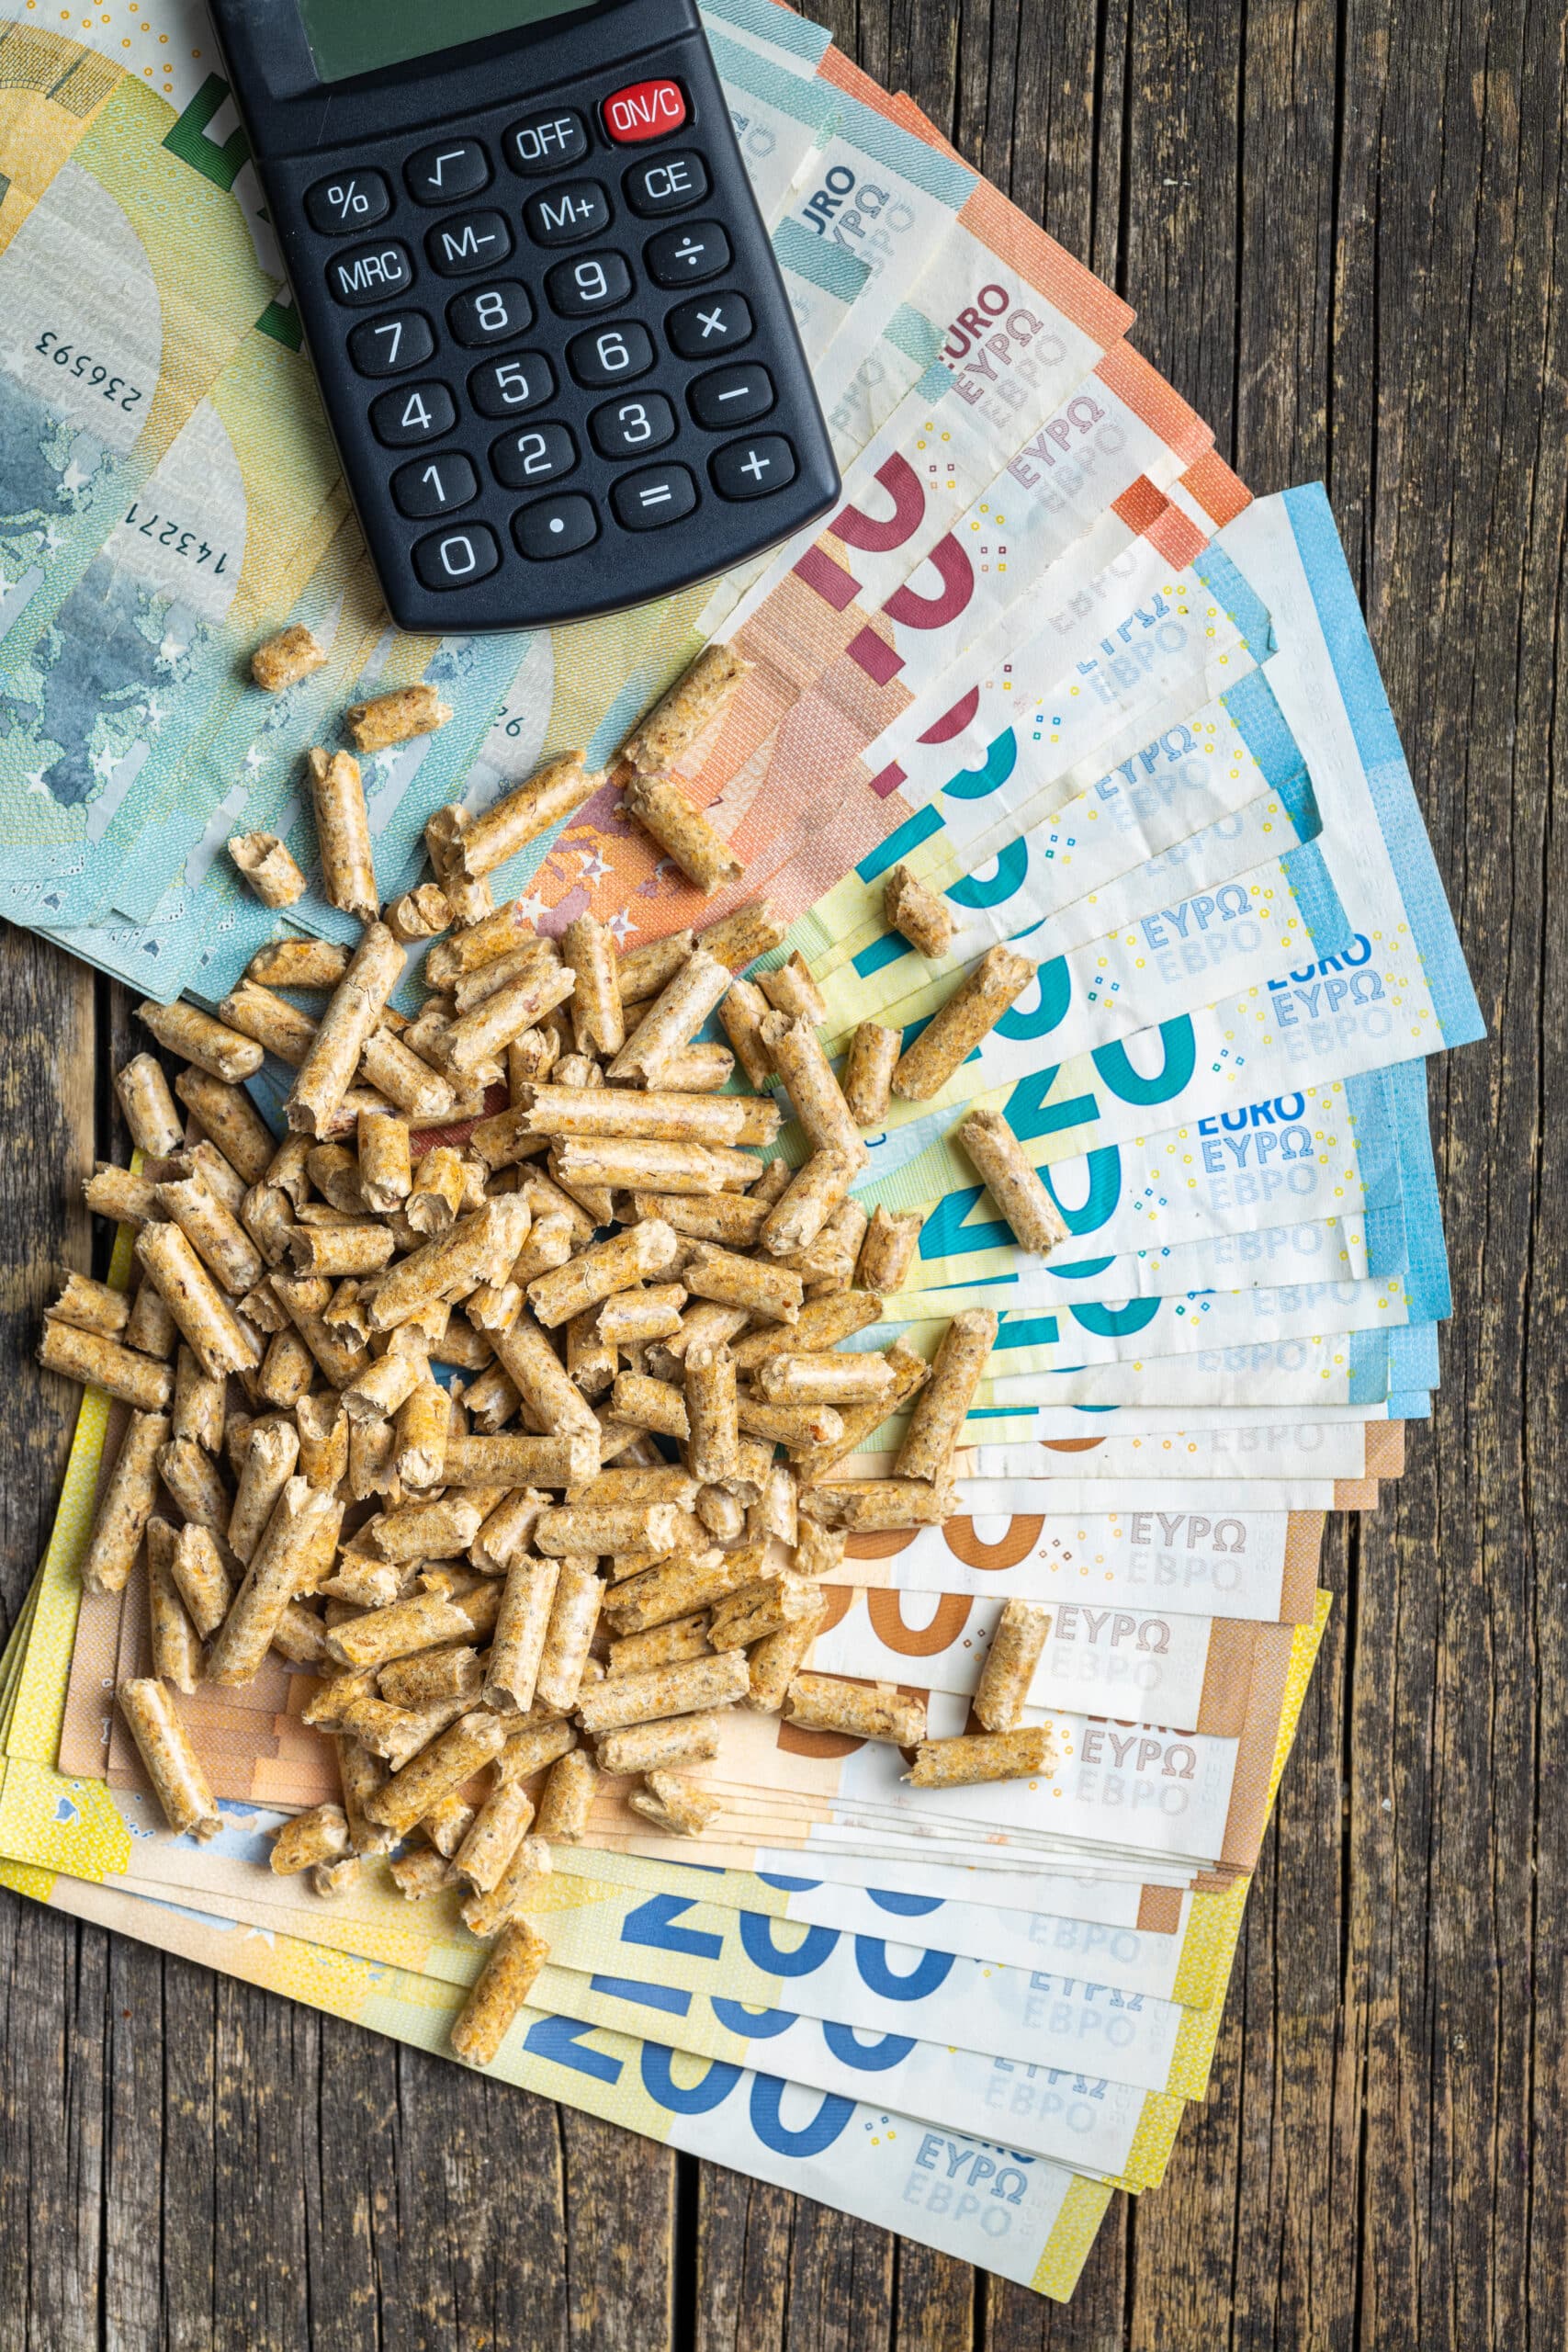 wooden pellets, calculator and euro money. concept of increasing energy prices.